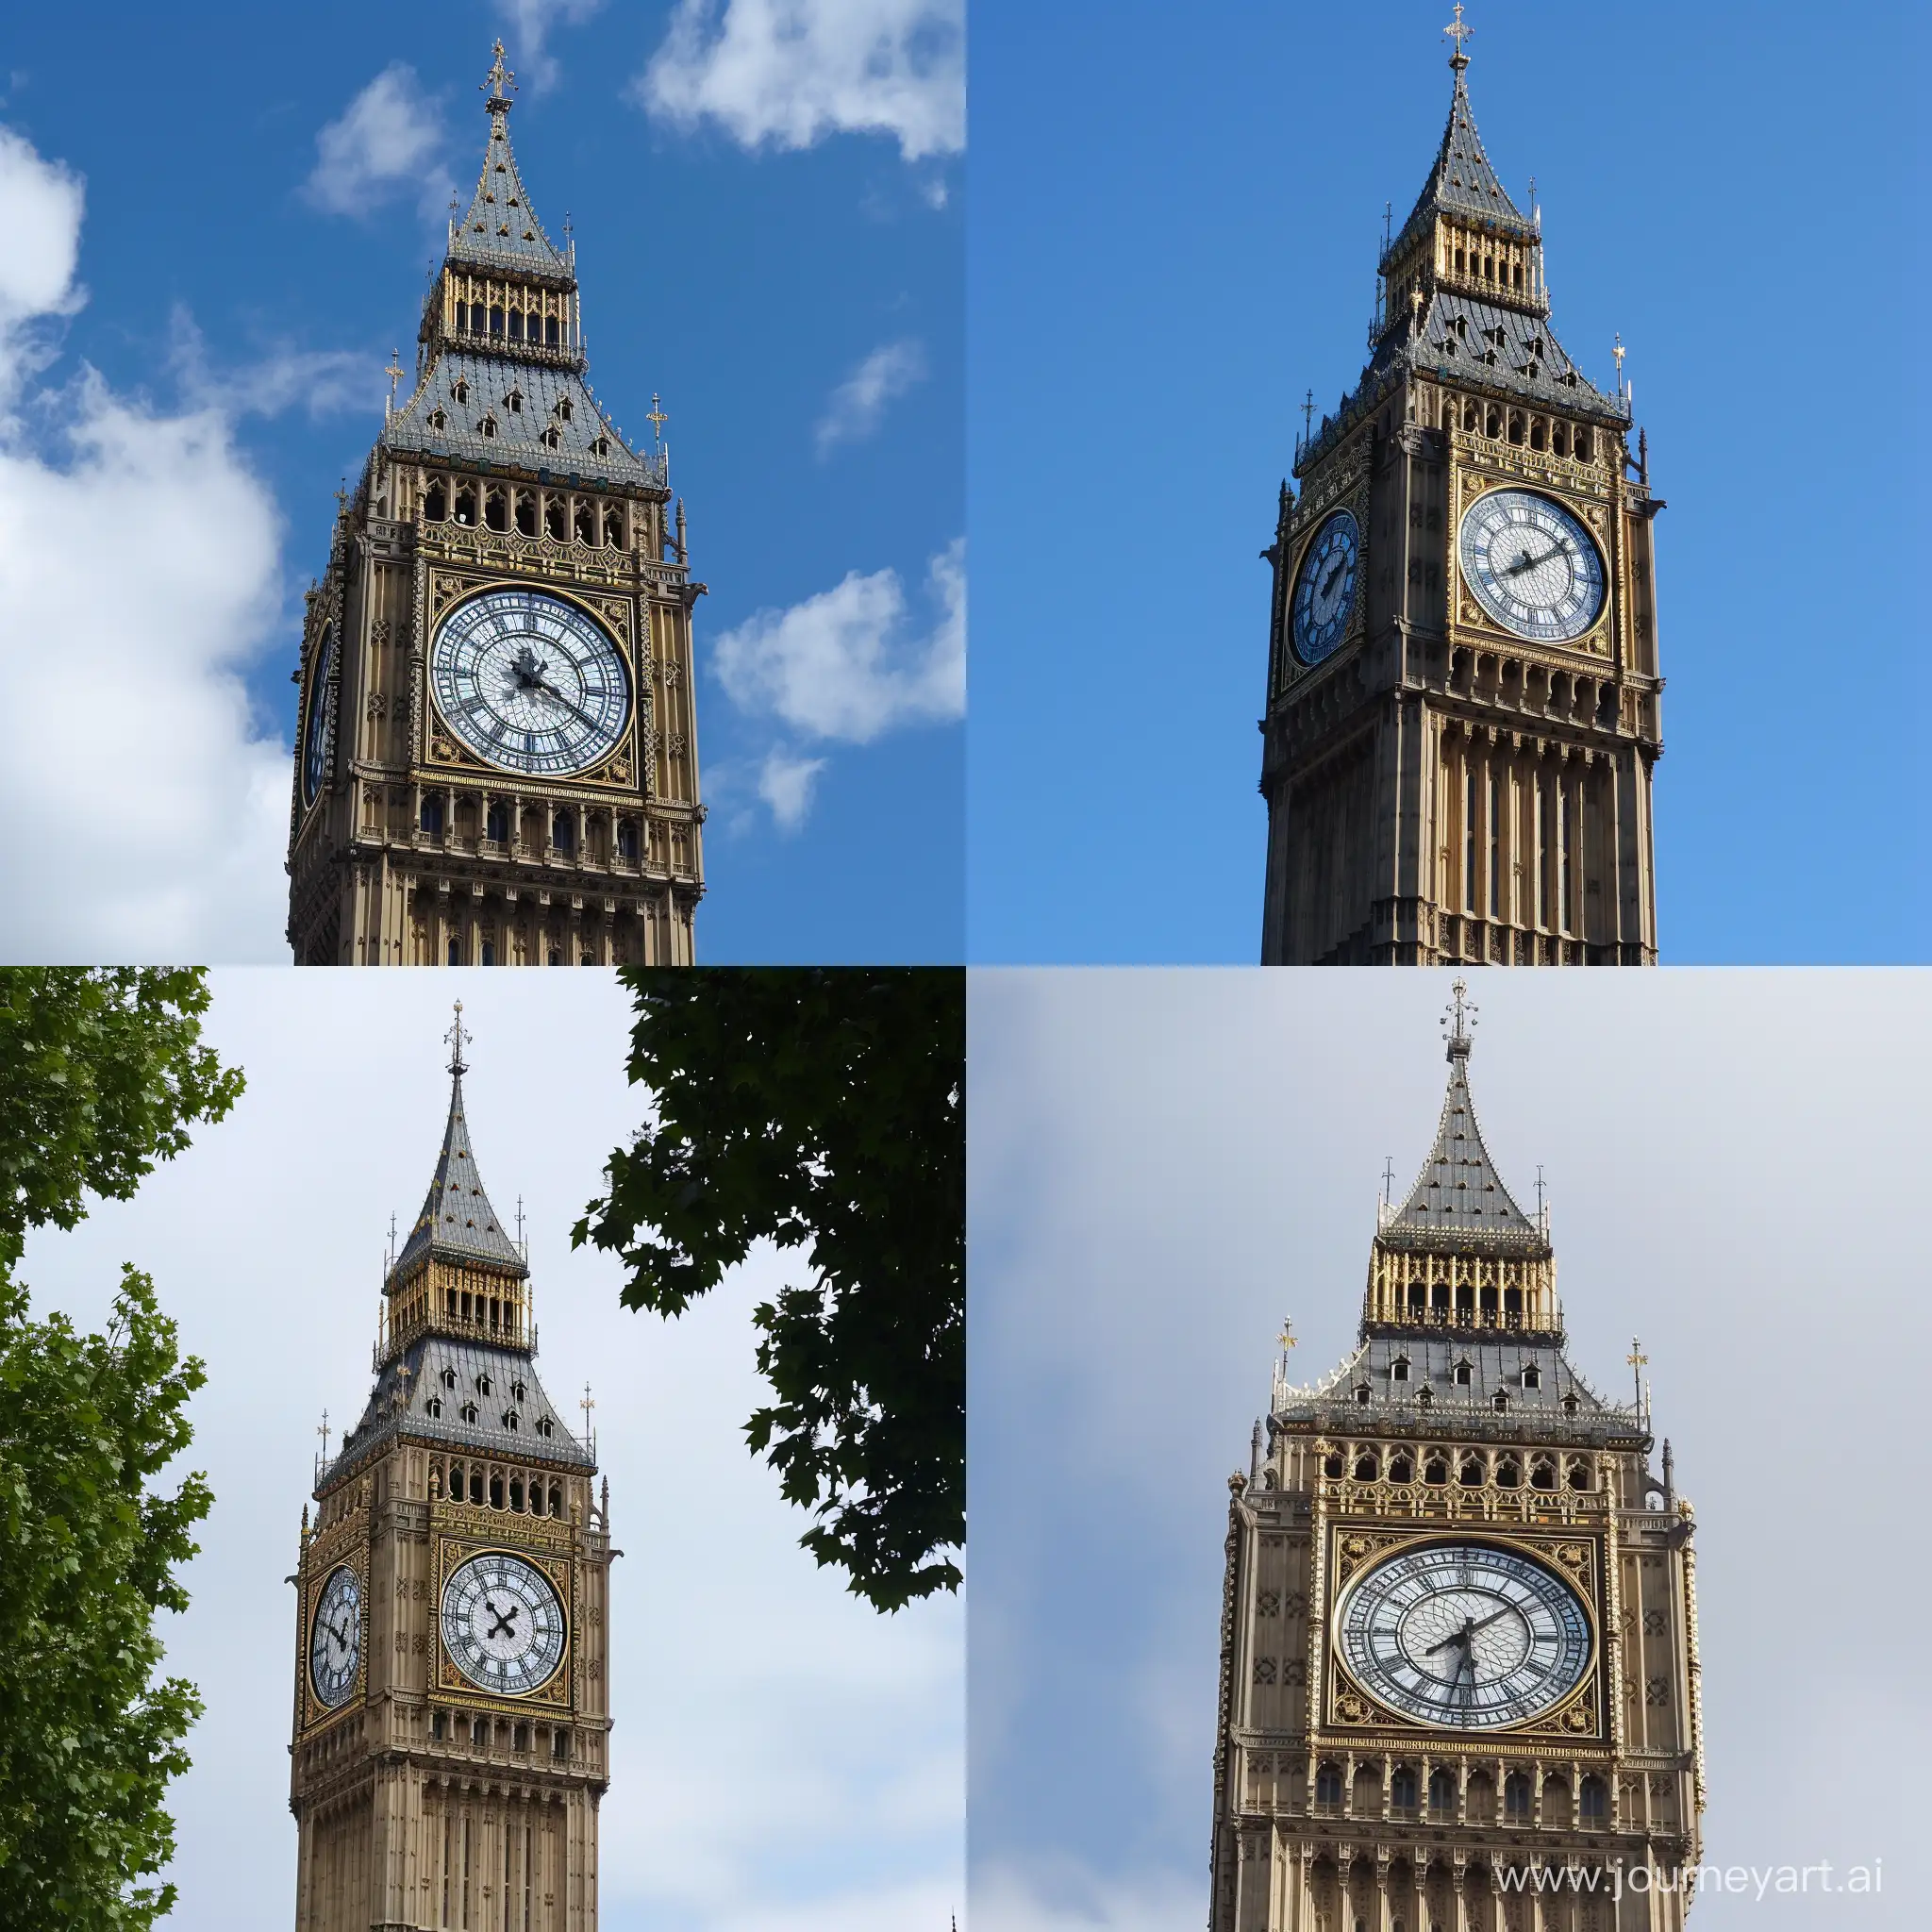 Iconic-Big-Ben-Clock-Tower-in-Square-Format